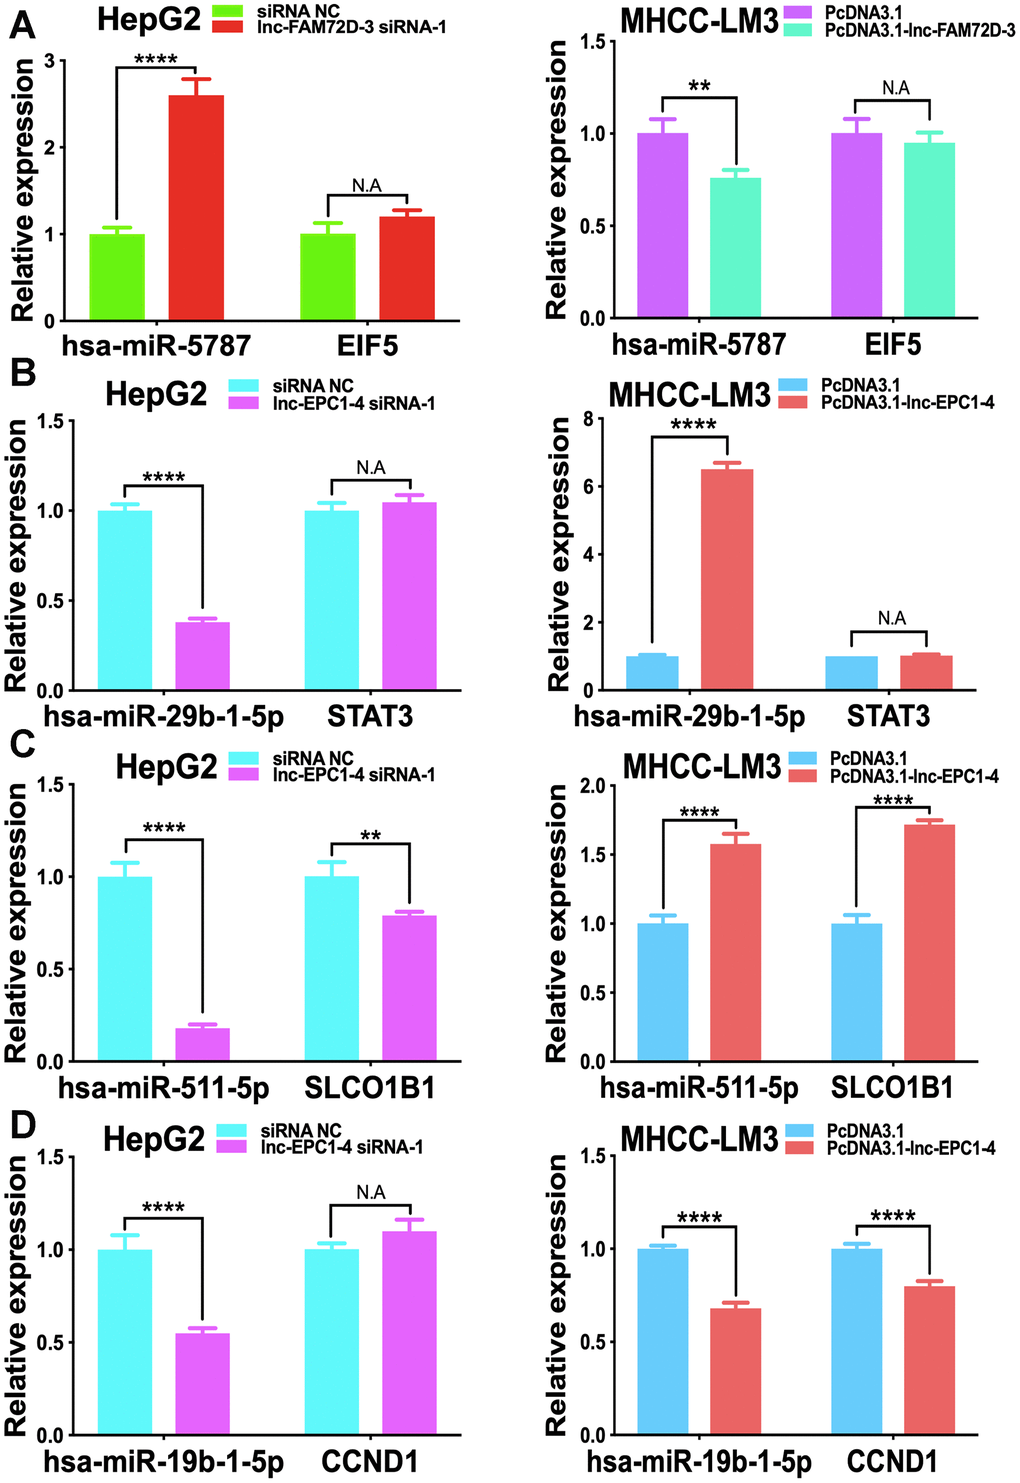 Effect of lnc-FAM72D-3 and lnc-EPC1-4 suppression and overexpression on candidate targets. (A) has-miR-5787 and EIF5 expression when lnc-FAM72D-3 was suppressed or overexpressed in HepG2 and MHCC-LM3 cells. (B) has-miR-29b-1-5p and STAT3 expression when lnc-EPC1-4 was suppressed or overexpressed in HepG2 and MHCC-LM3 cells. (C) has-miR-511-5p and SLCO1B1 expression when lnc-EPC1-4 was suppressed or overexpressed in HepG2 and MHCC-LM3 cells. (D) has-miR-19b-1-5p and CCND1 expression when lnc-EPC1-4 was suppressed or overexpressed in HepG2 and MHCC-LM3 cells. STAT3, signal transducer and activator of transcription 3.